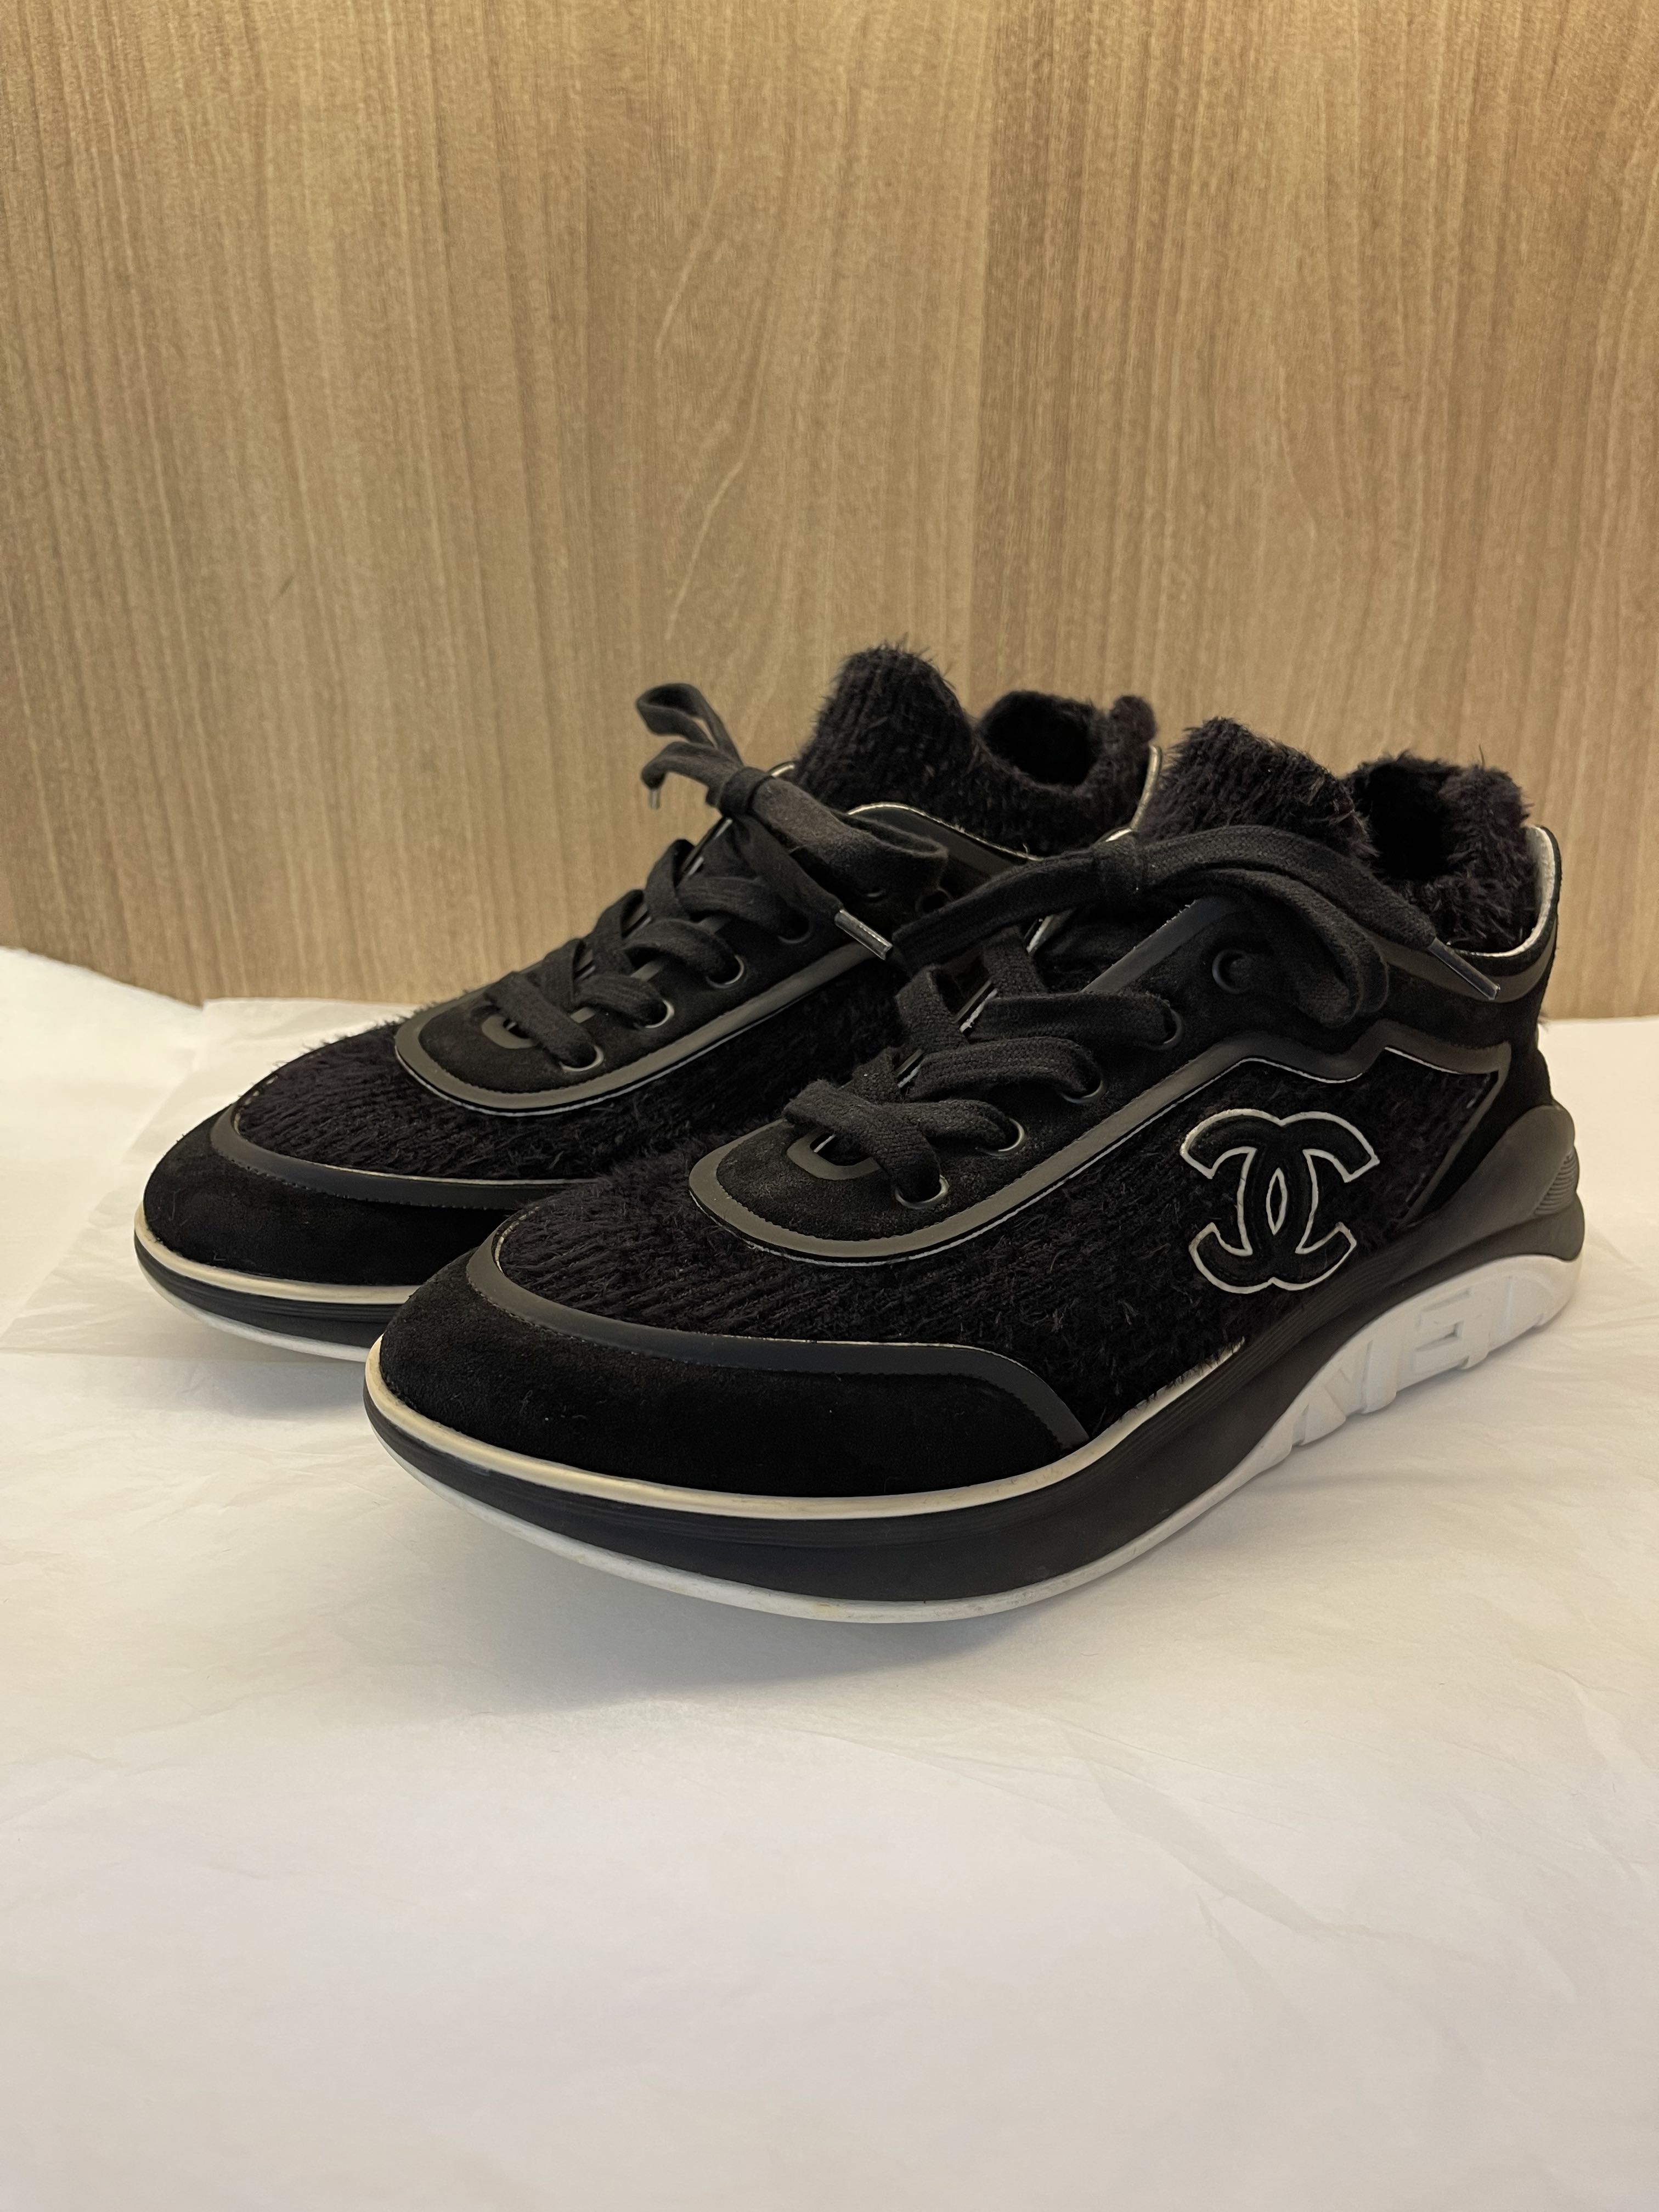 chanel trainers size 6